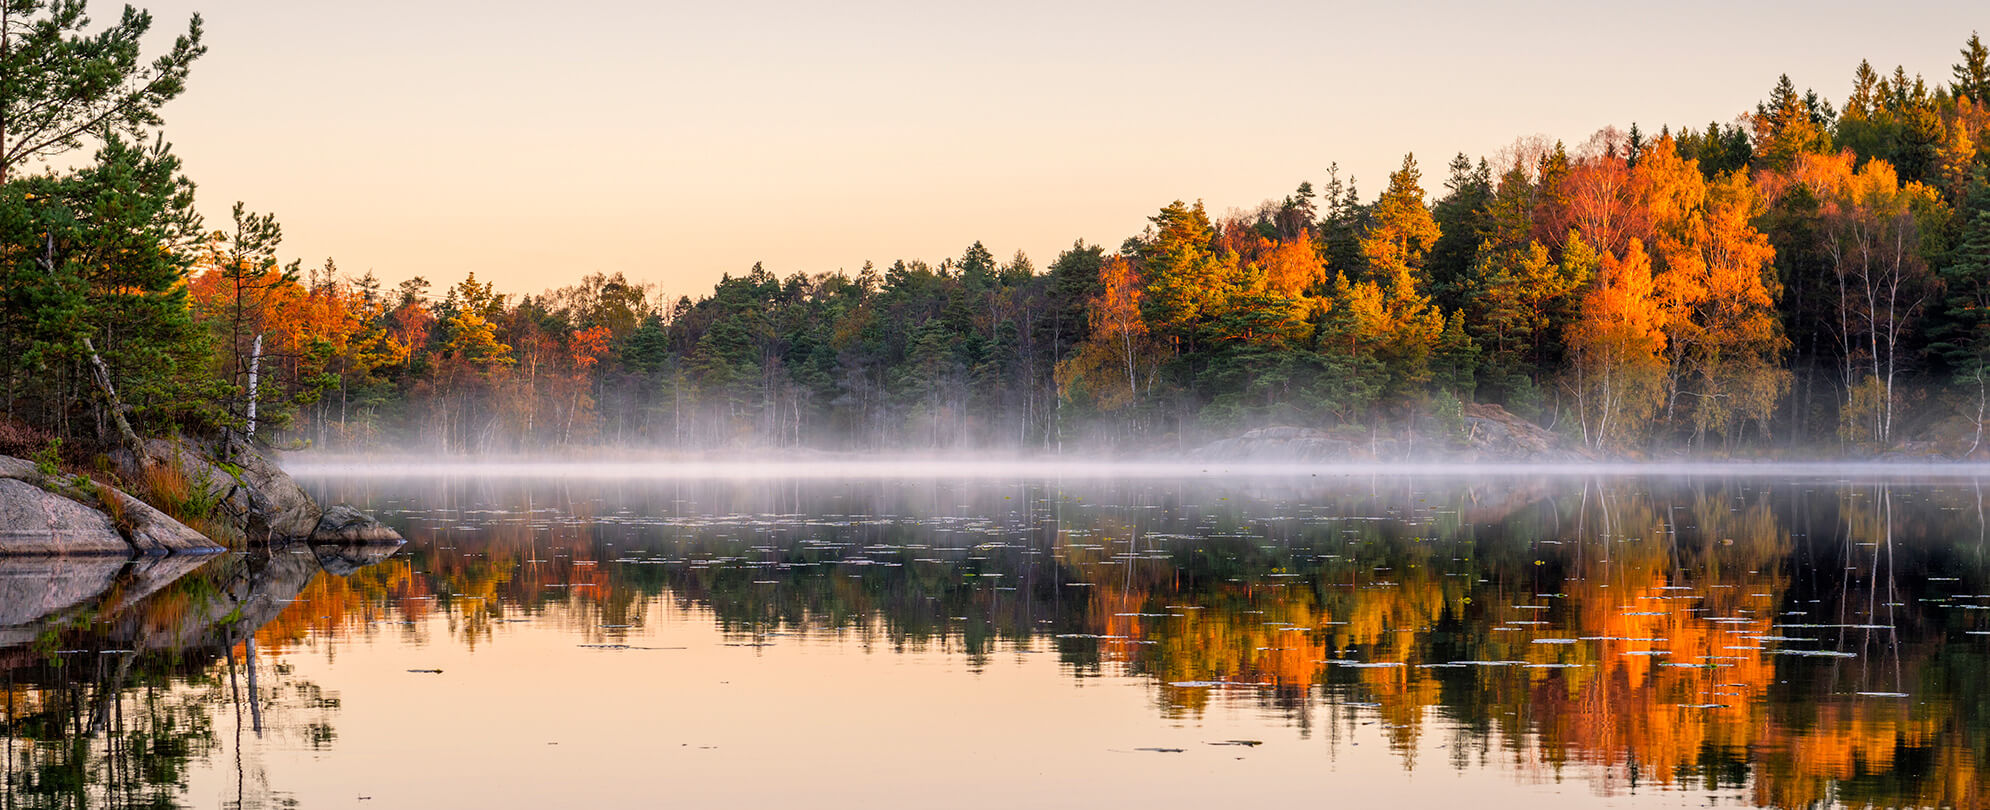 Fog covered lake surrounded by an autumn forrest